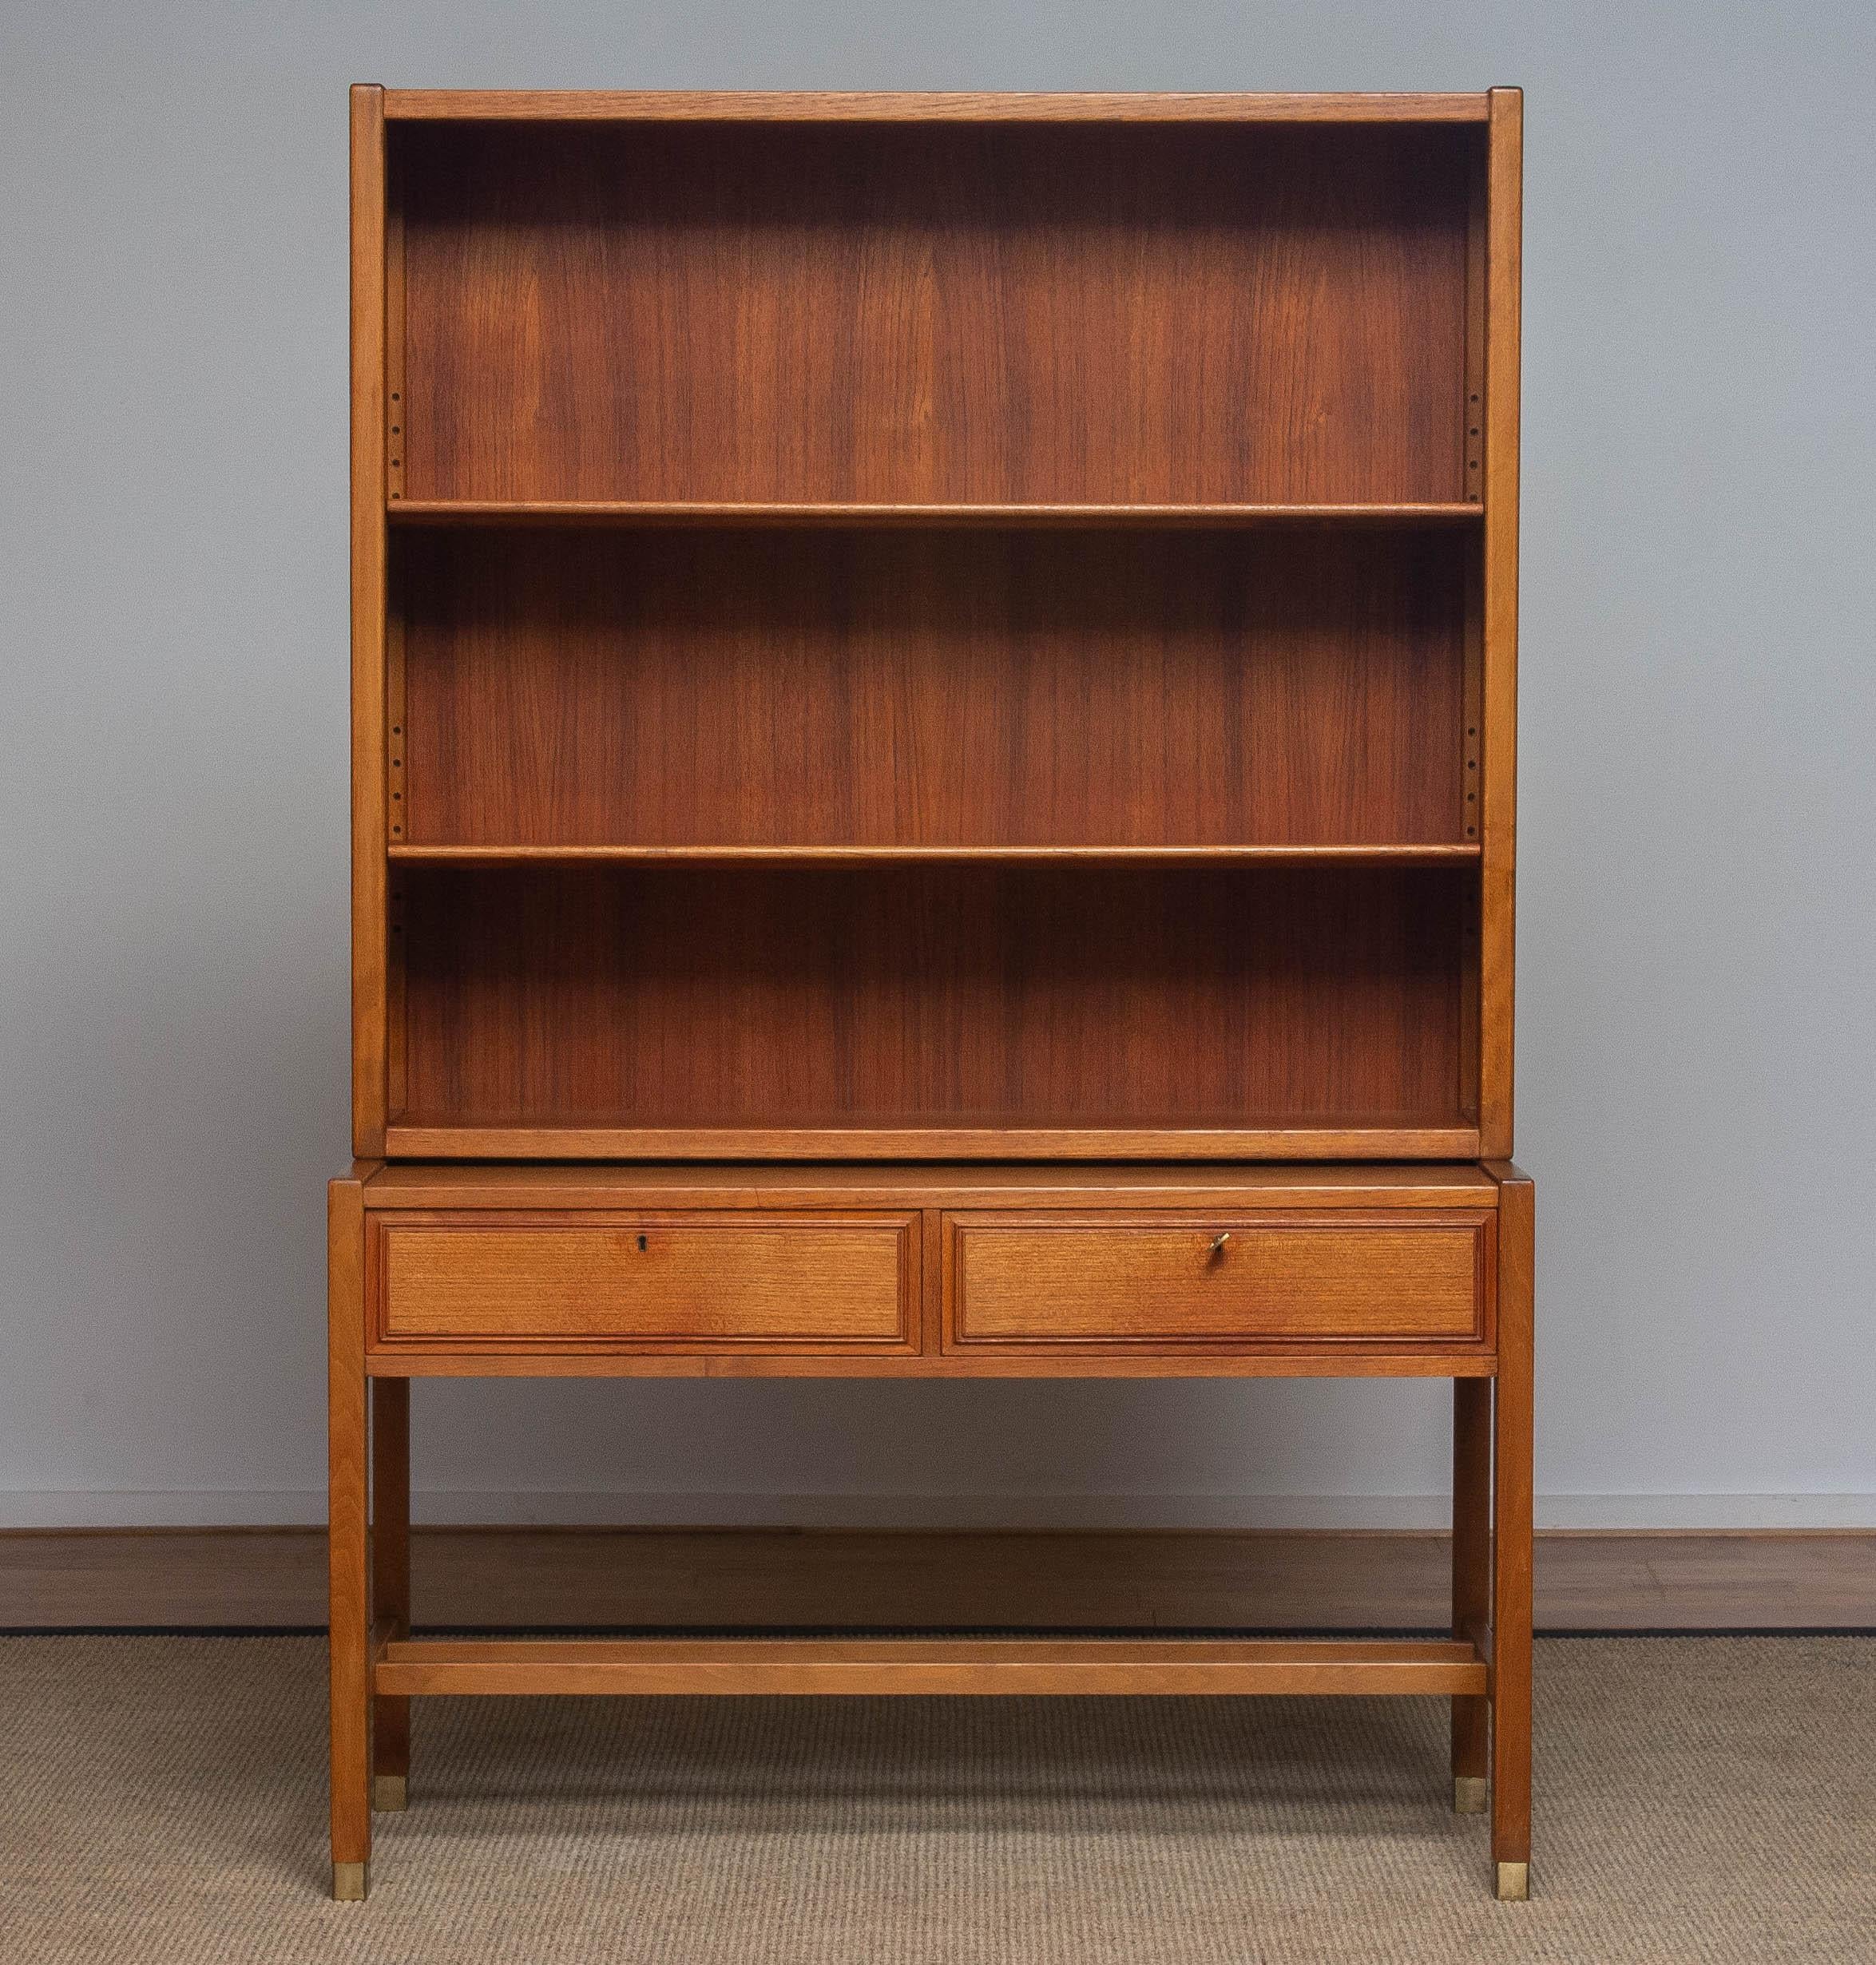 Elegant teak bookcase cabinet build up with a two lockable drawers sideboard underneath and a cabinet on top in which are two adjustable shelf.
Build up in high quality materials and overall in good condition.
Designed by Carl-Axel Acking for